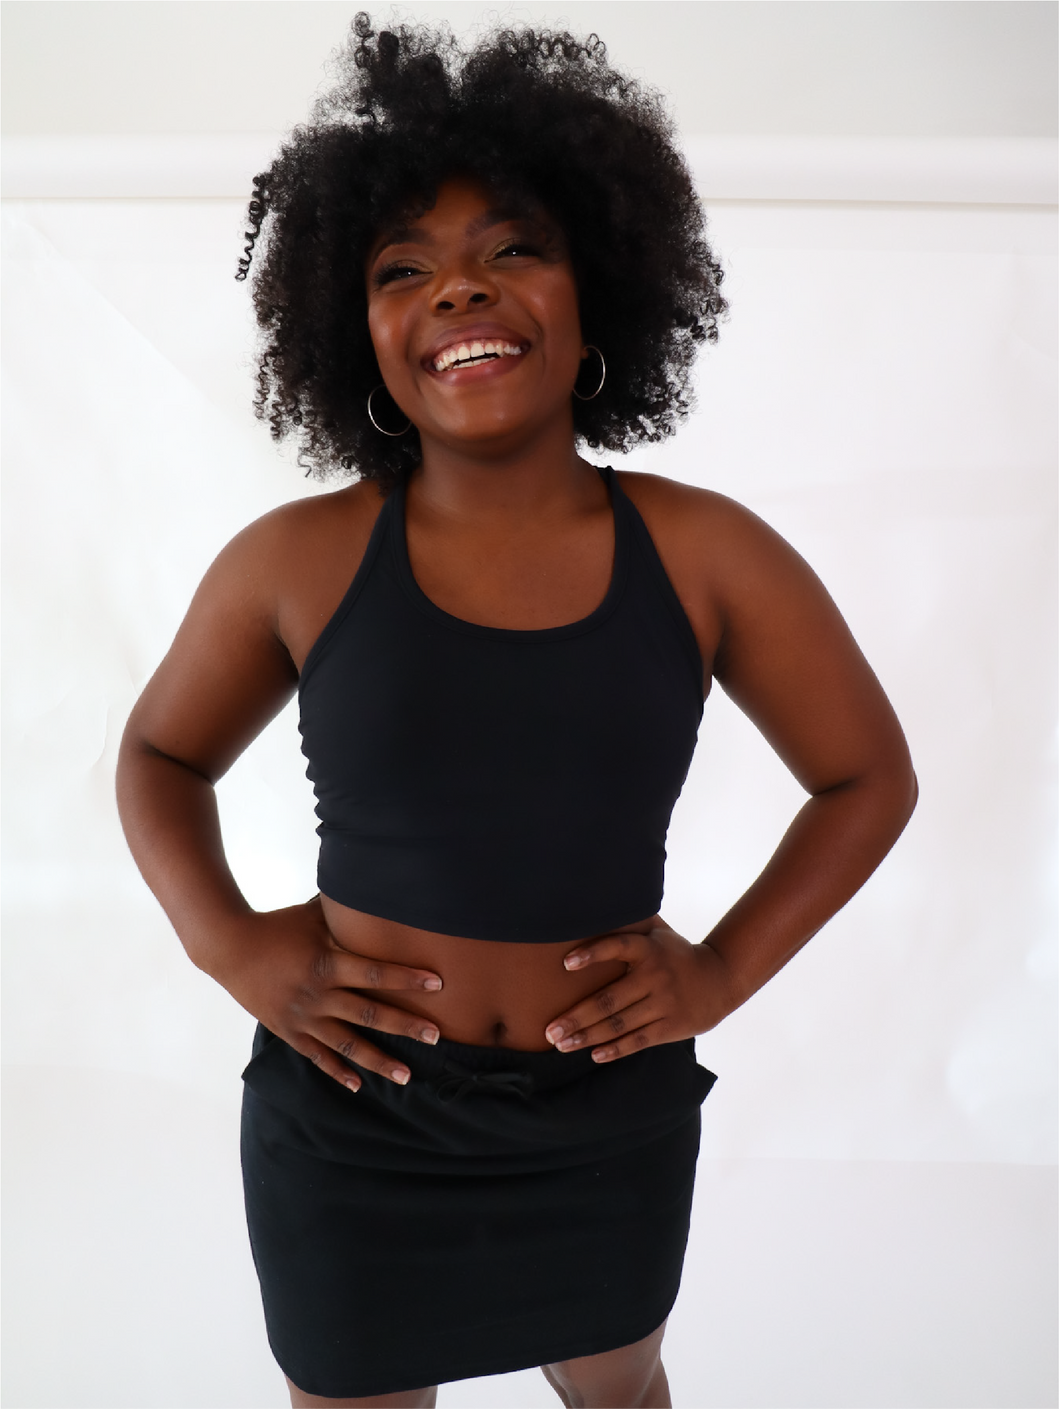 The black Peachy tank is a comfortable cropped tank top with a built in sports bra made for everyday wear.